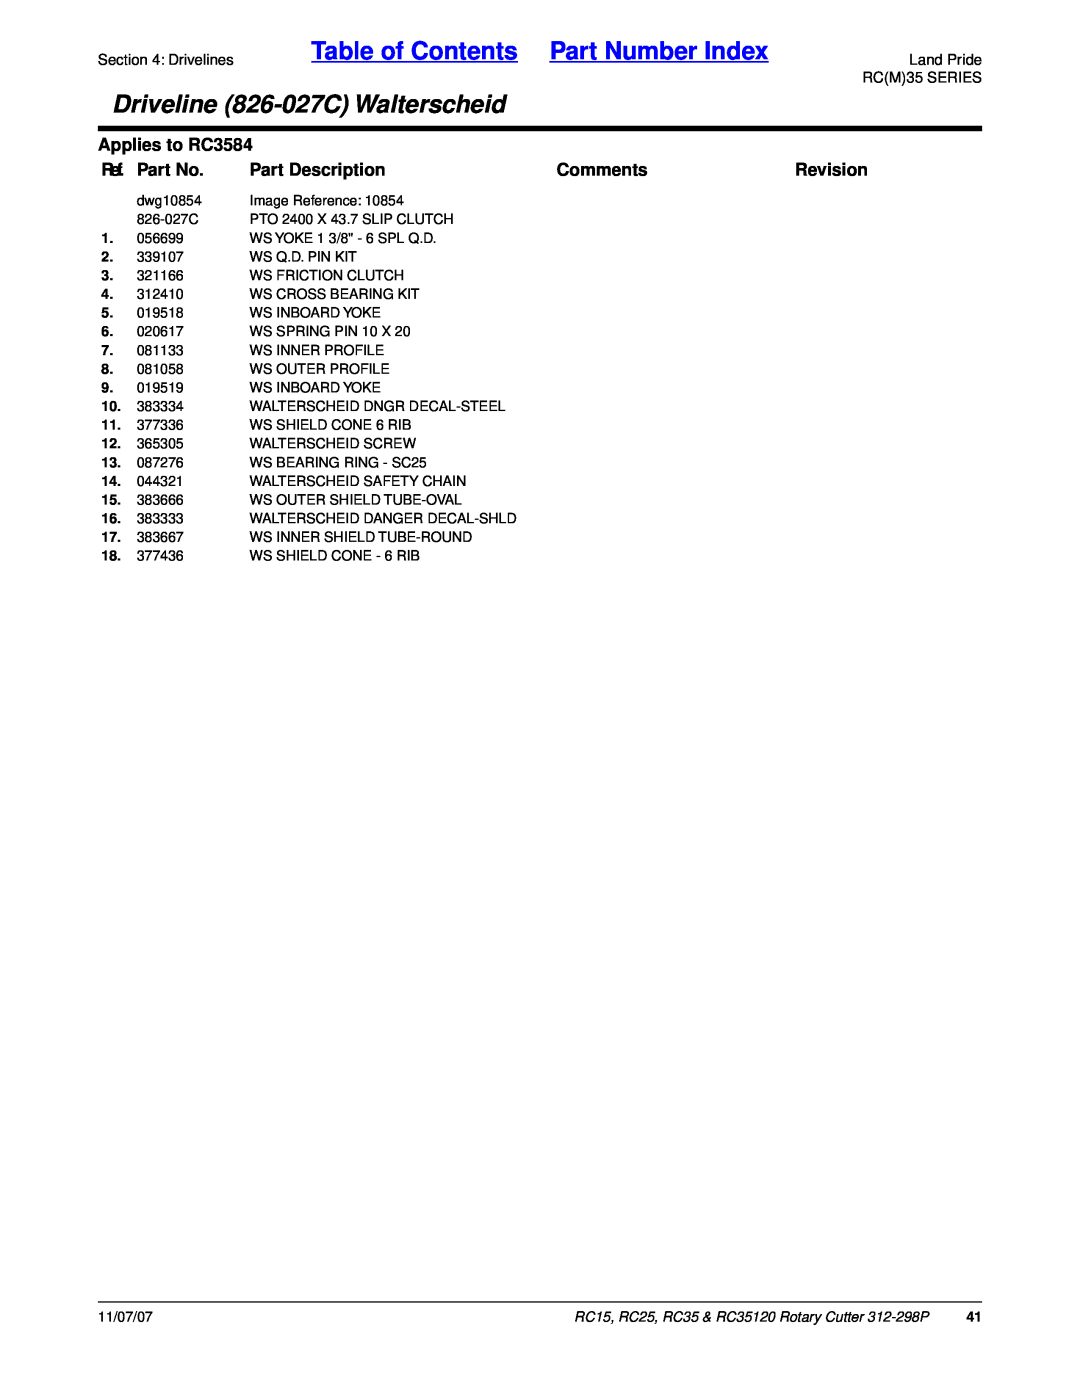 Land Pride RC25 Table of Contents Part Number Index, Driveline 826-027CWalterscheid, Applies to RC3584, Ref. Part No 